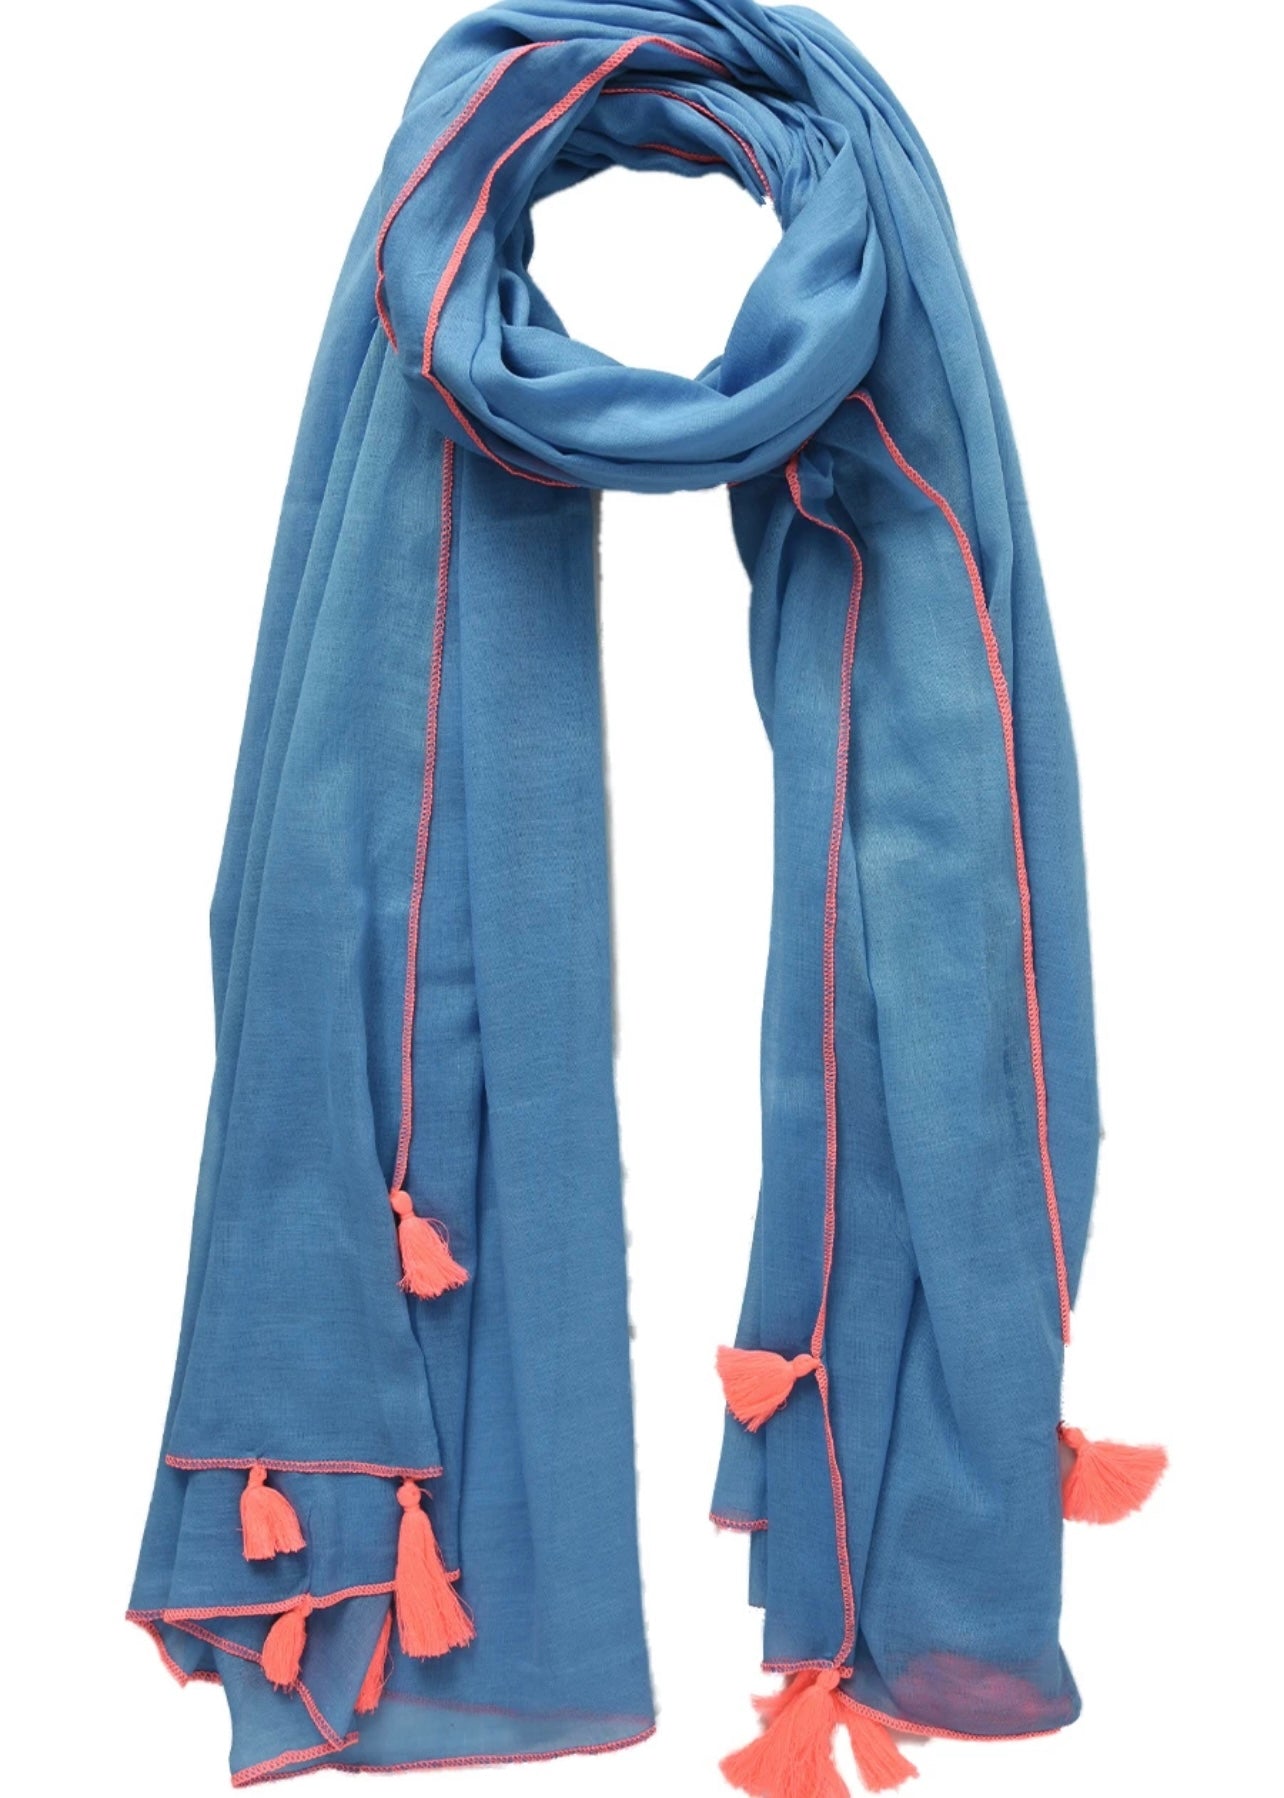 Sands Blue and Coral Tassel Scarf*